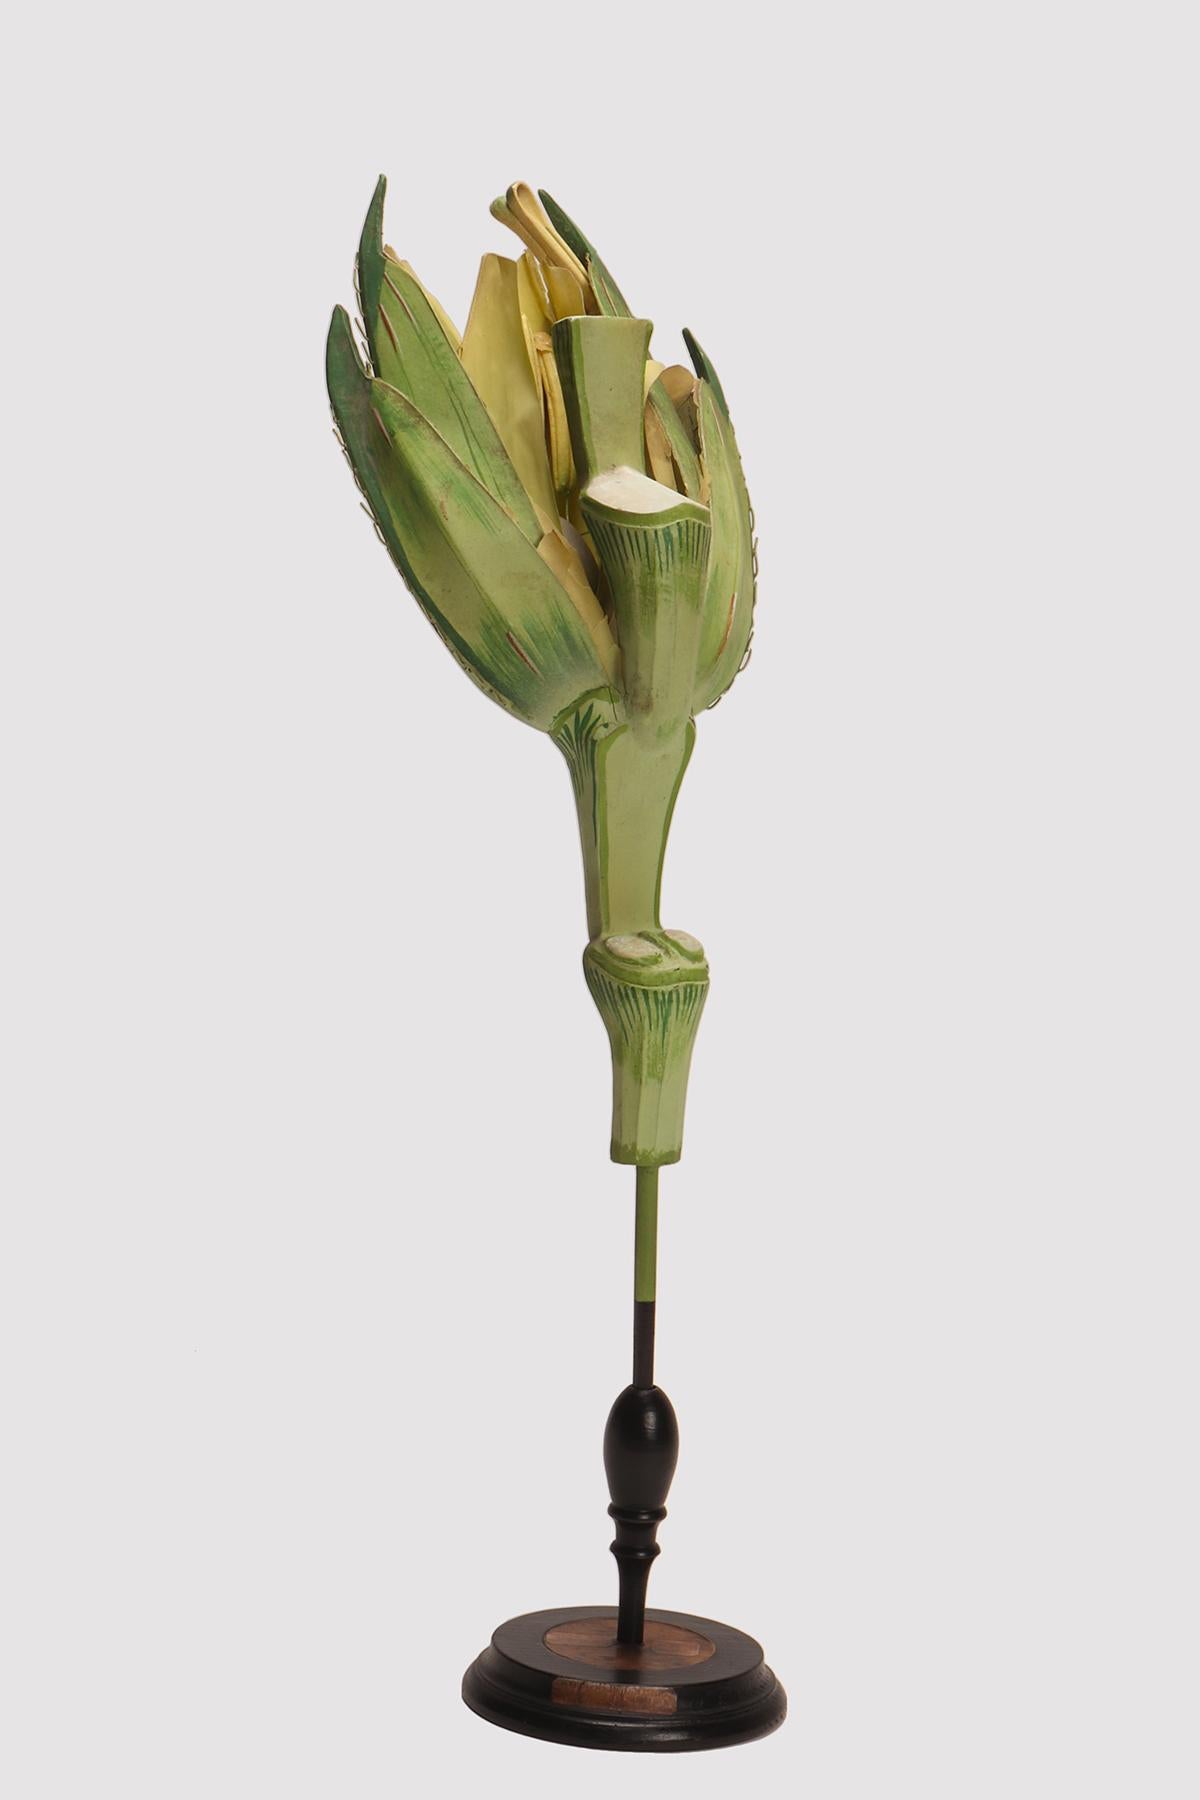 A botanic didactical specimen depicting a Wheat flower (Triticum durum), made out of papier mache wood and metal with black wooden base, hand painted. Extremely detailed. Osterloh Modell n.19. Germany circa 1900.